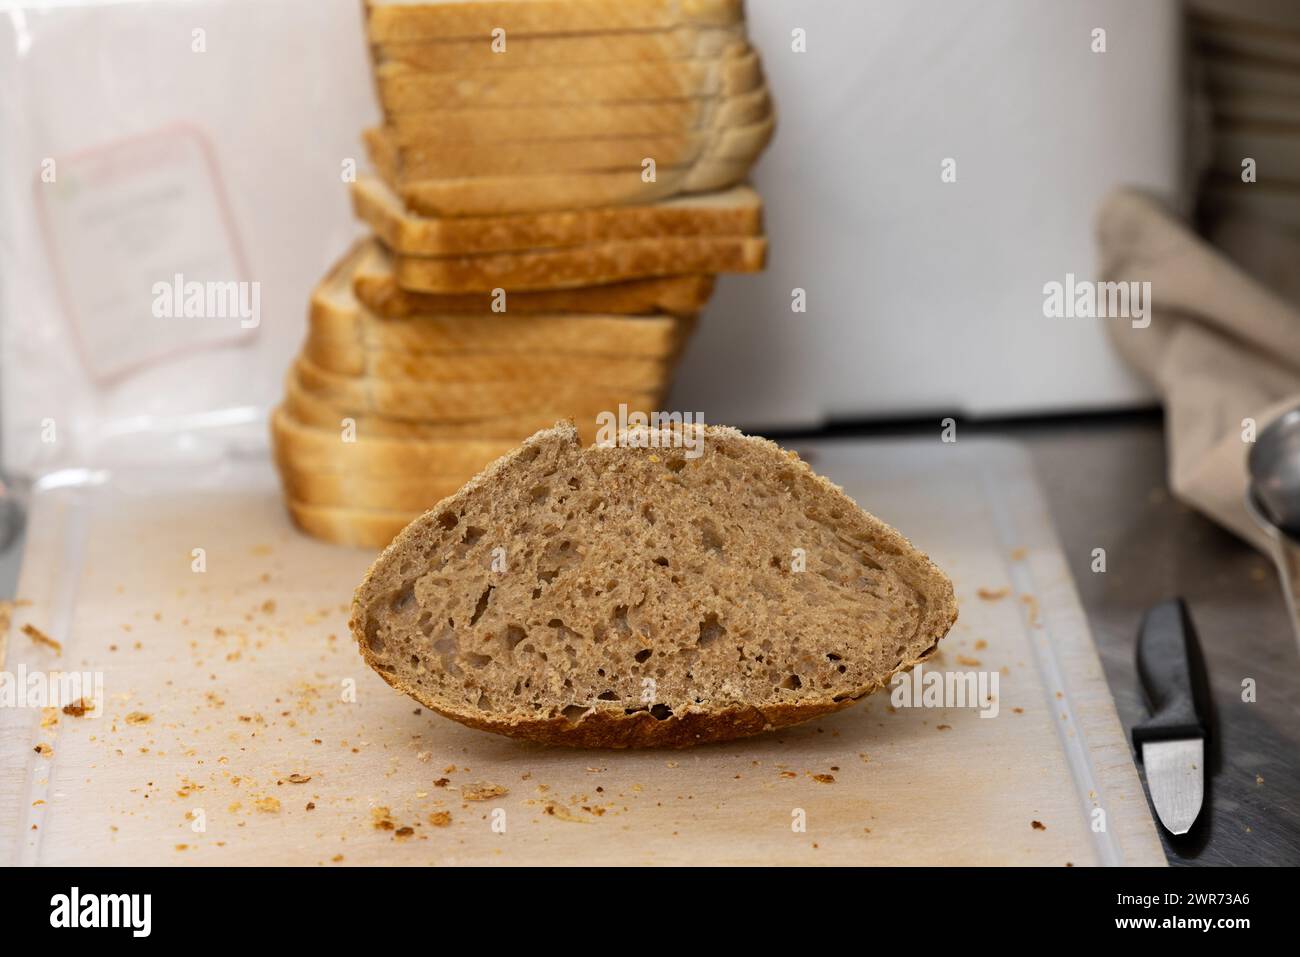 The image captures a half-slice of whole grain bread resting on a wooden cutting board with crumbs around it, suggesting the slicing process has just occurred. In the background, stacked slices of white bread are slightly blurred, contrasting with the whole grain piece in the foreground. A knife lies to the side, indicating the bread was freshly cut, likely in a home or bakery kitchen. Sliced Whole Grain Bread on Cutting Board. High quality photo Stock Photo